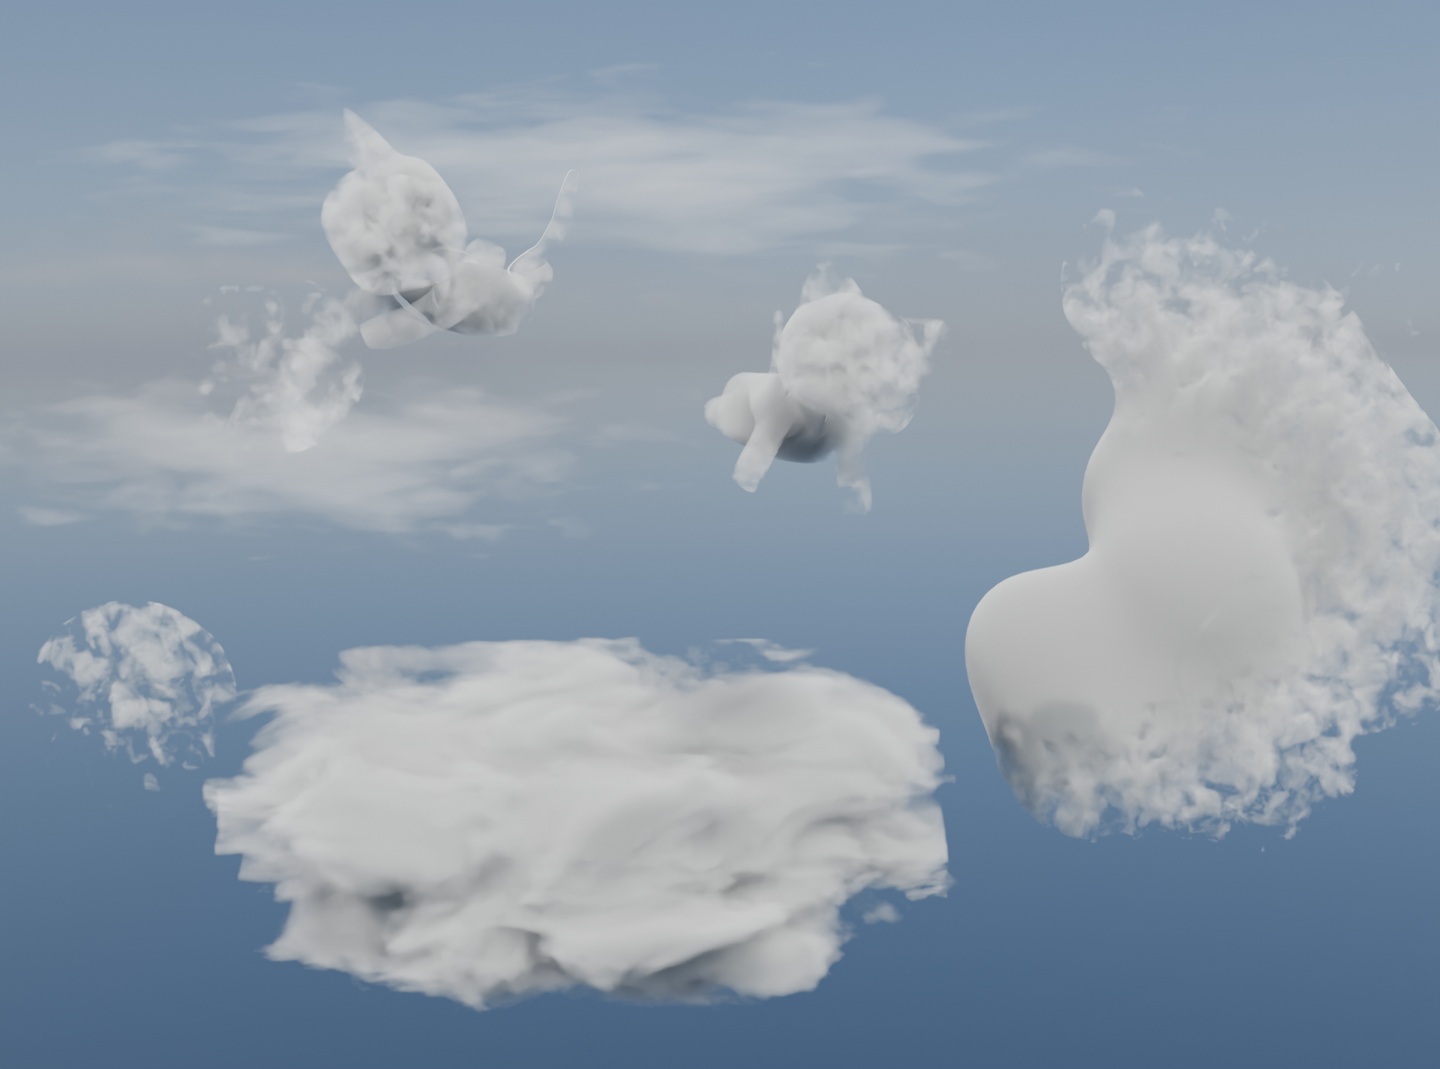 Image description: An experimental 3D render of white clouds and a blue sky. One of the clouds looks like a regular cloud. Some of the clouds are round and made from metaball objects and two of the clouds are shaped like cats. One of the cat-shaped clouds looks like it's running towards a ball-shaped cloud